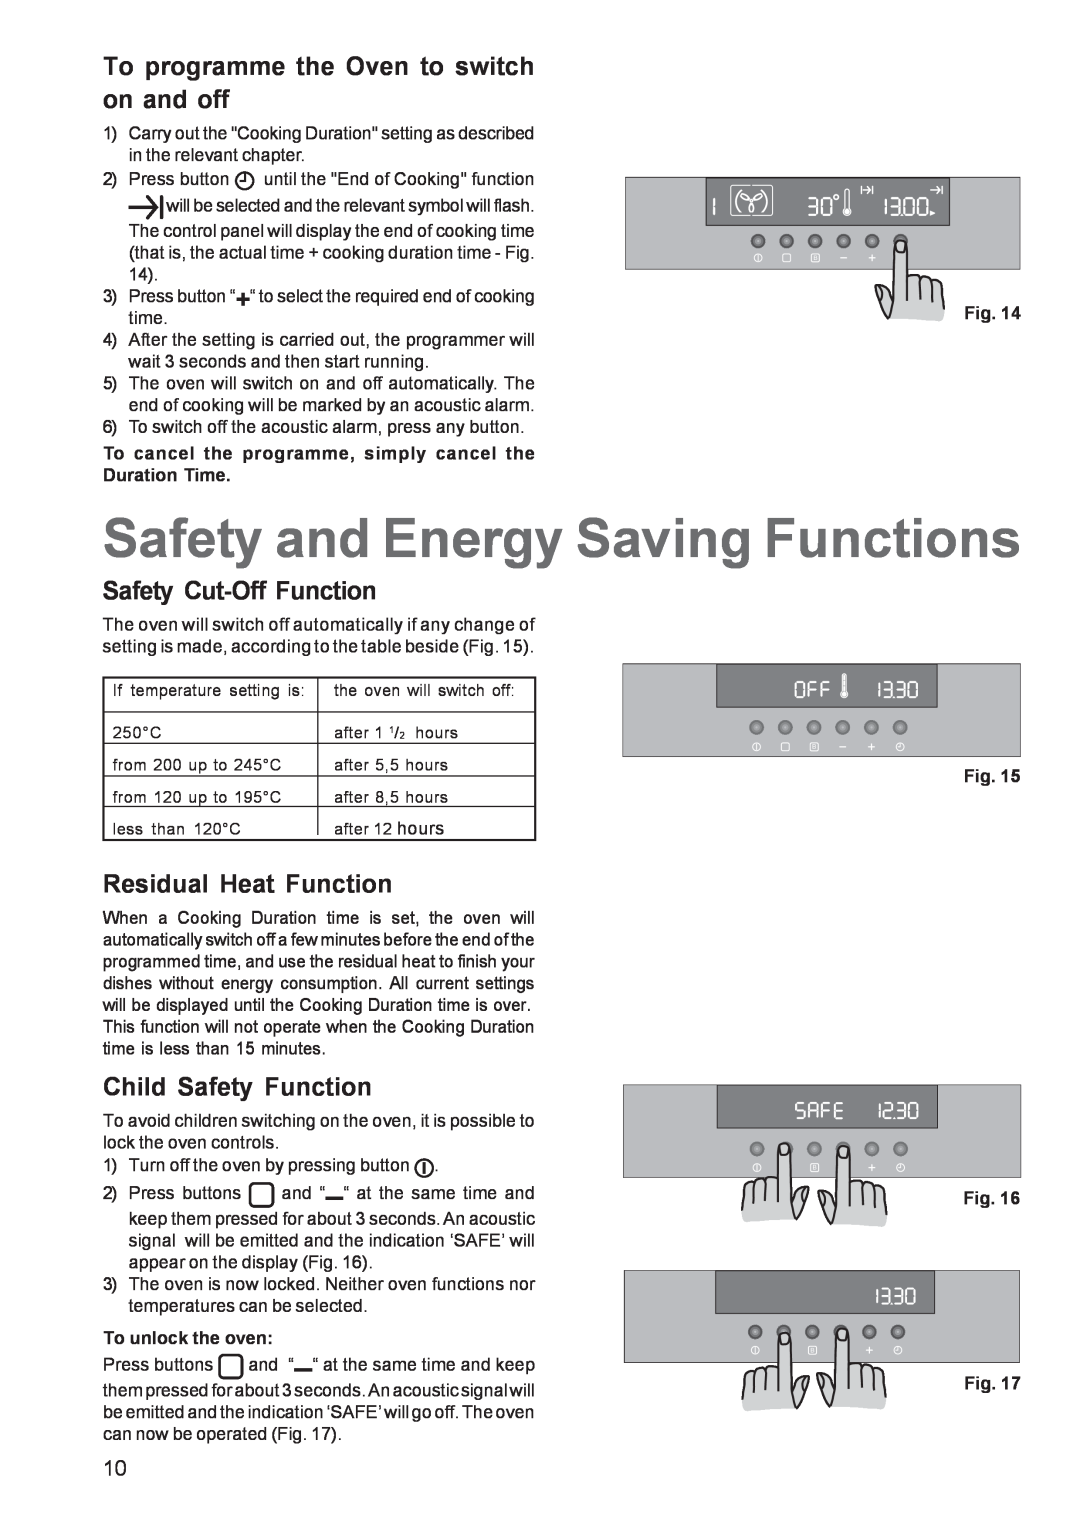 Zanussi ZBS 963 Safety and Energy Saving Functions, To programme the Oven to switch on and off, Safety Cut-Off Function 